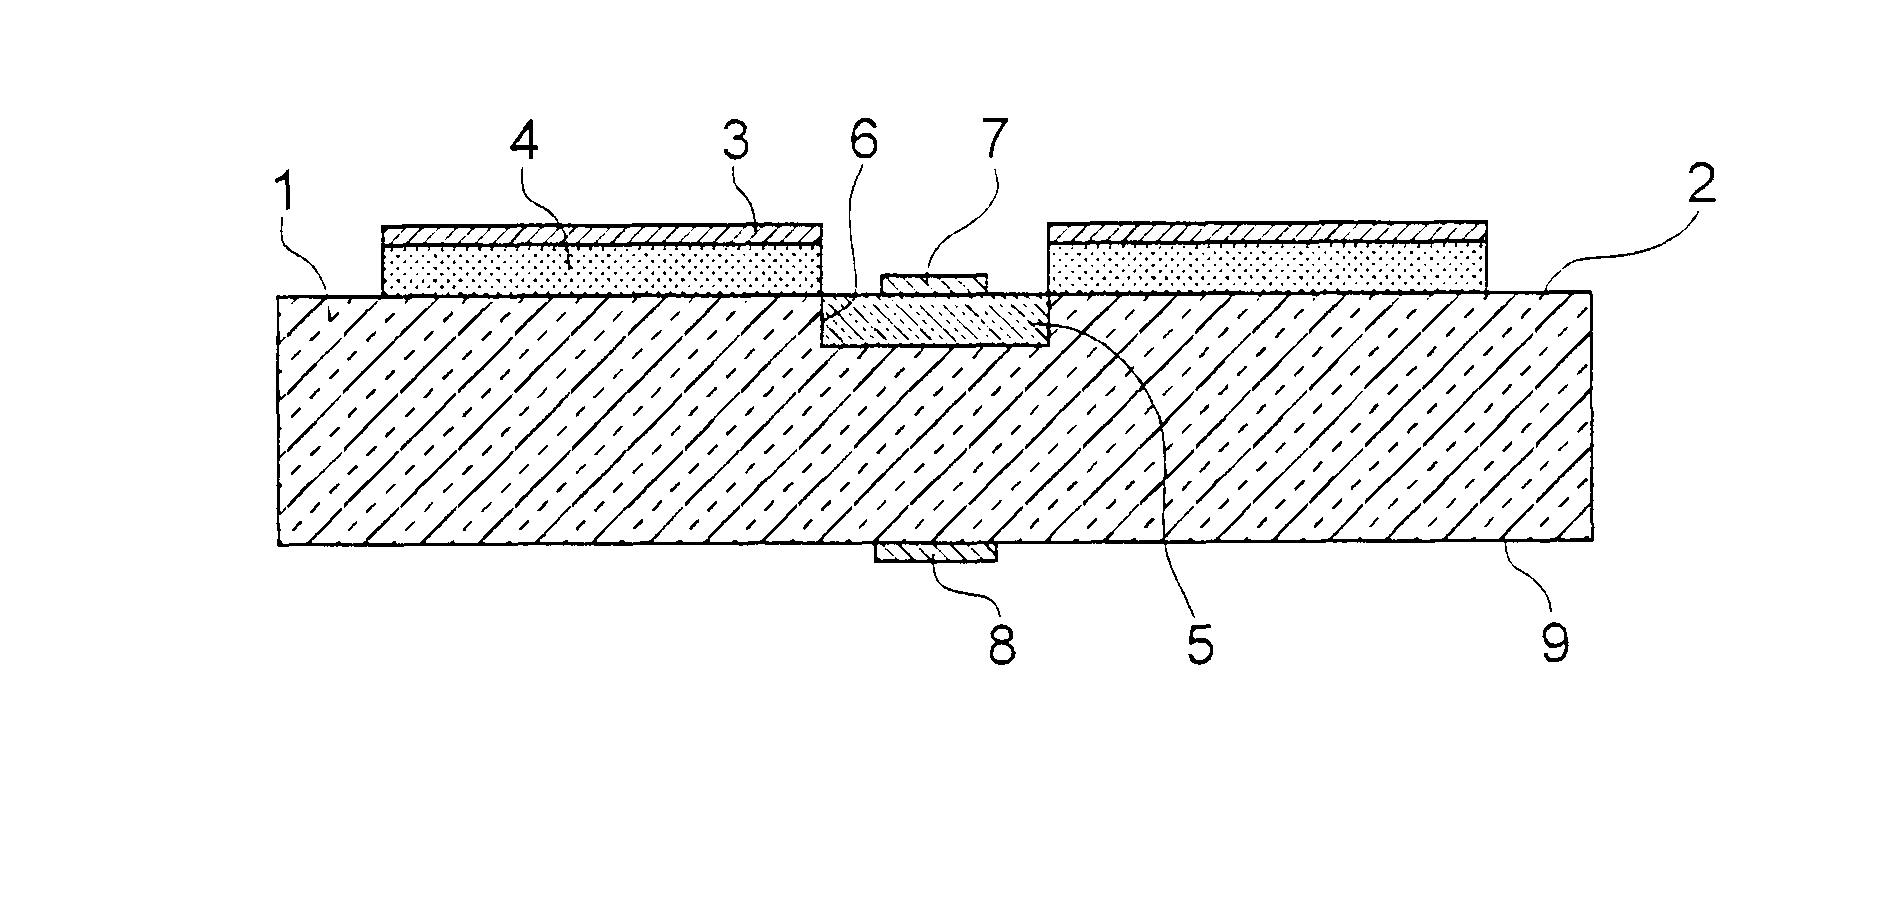 Light-emitting diode in semiconductor material